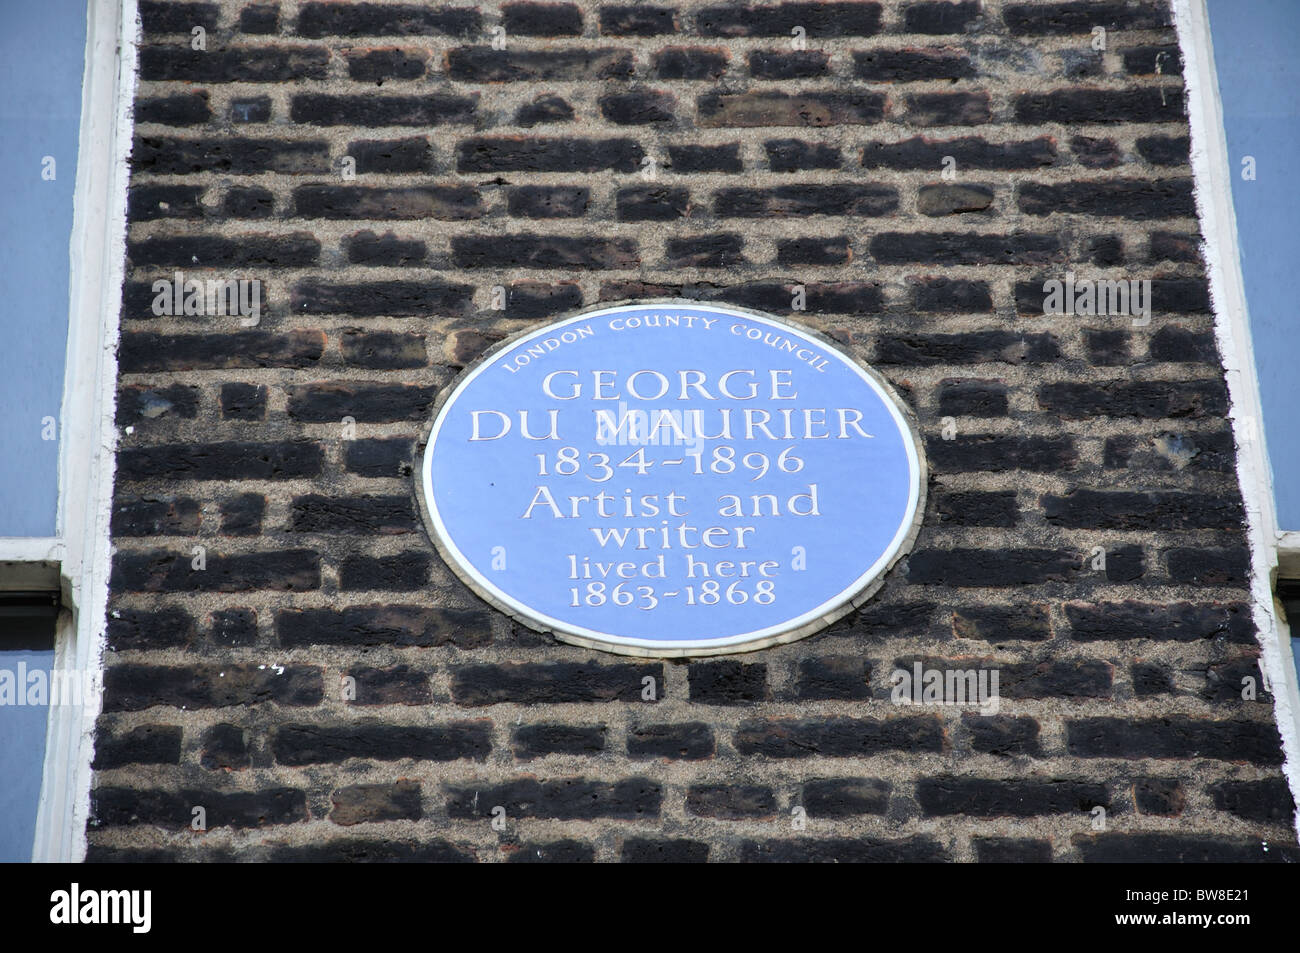 George du Maurier blue plaque, Great Russell Street, Bloomsbury, Londres, Angleterre, Royaume-Uni Banque D'Images